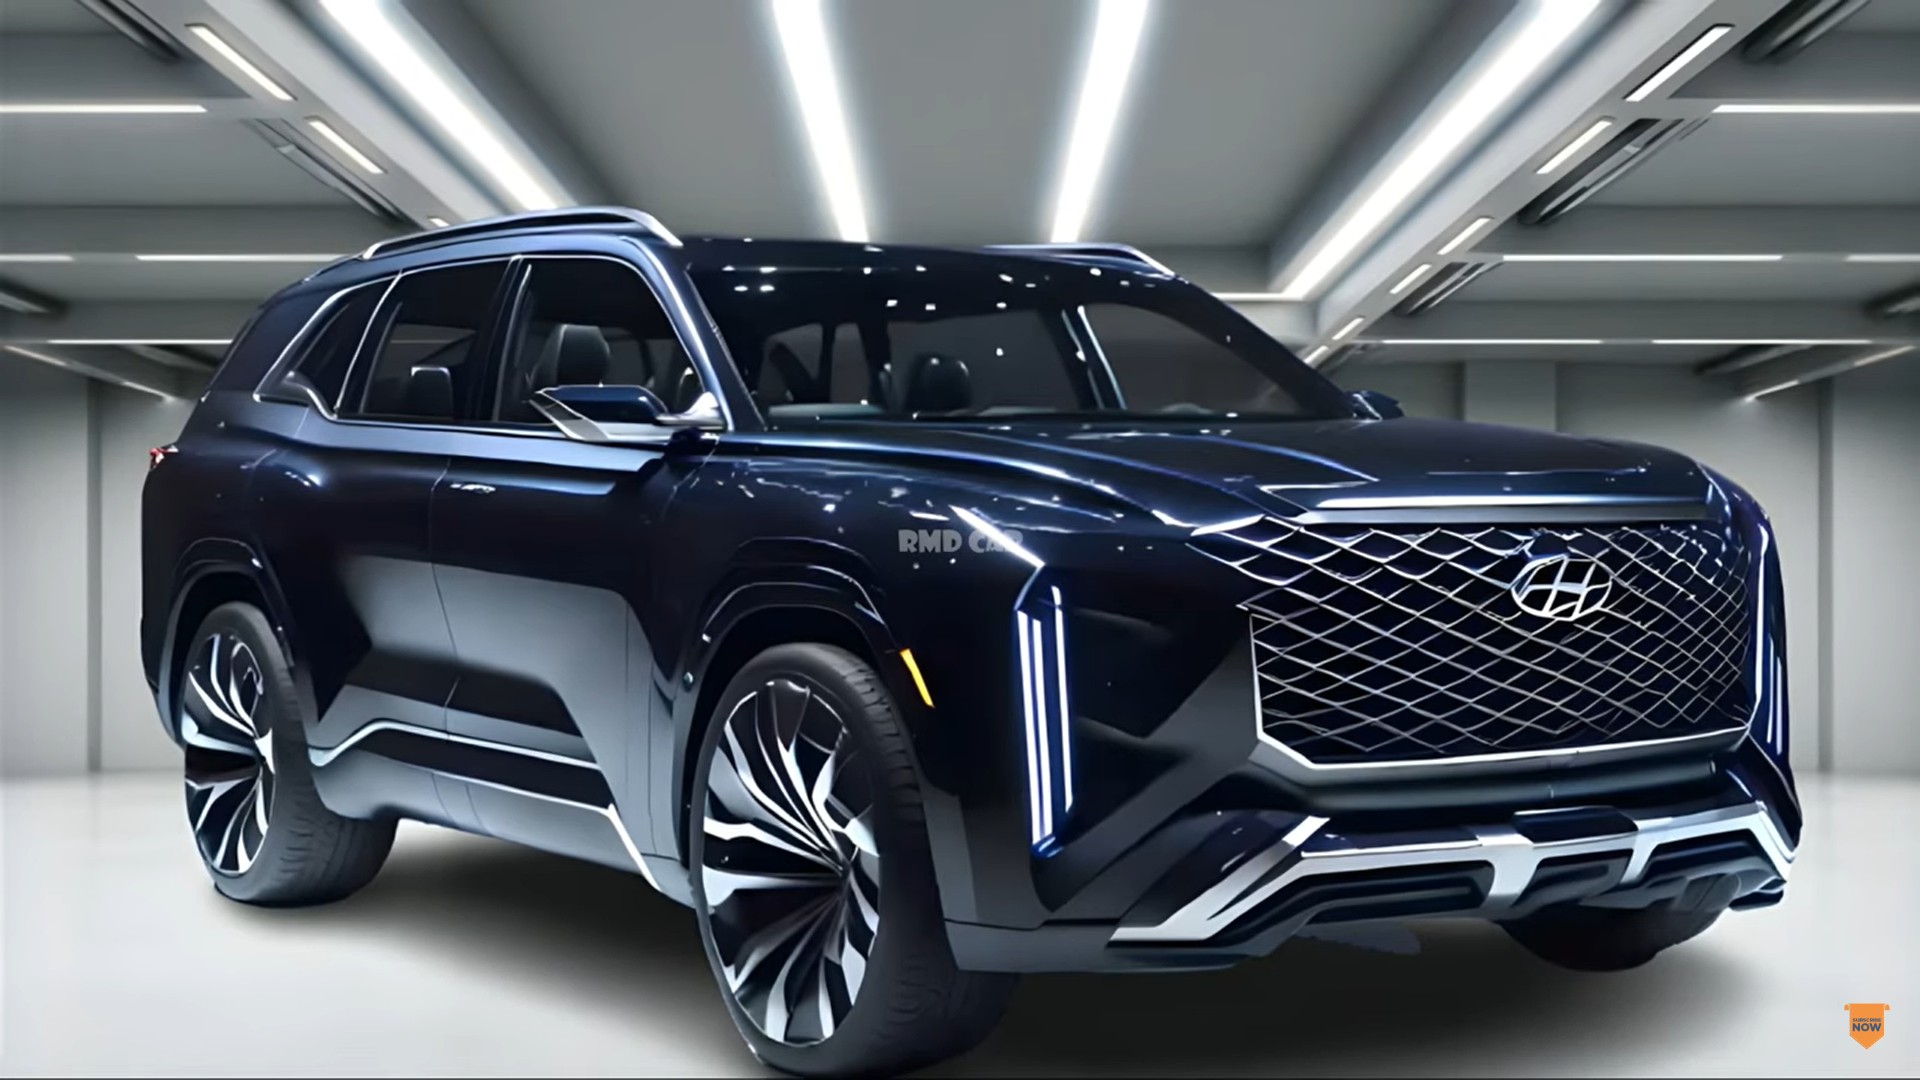 https://s1.cdn.autoevolution.com/images/news/big-hyundai-palisade-family-suv-gets-another-facelift-albeit-only-in-fantasy-land-219917_1.jpg